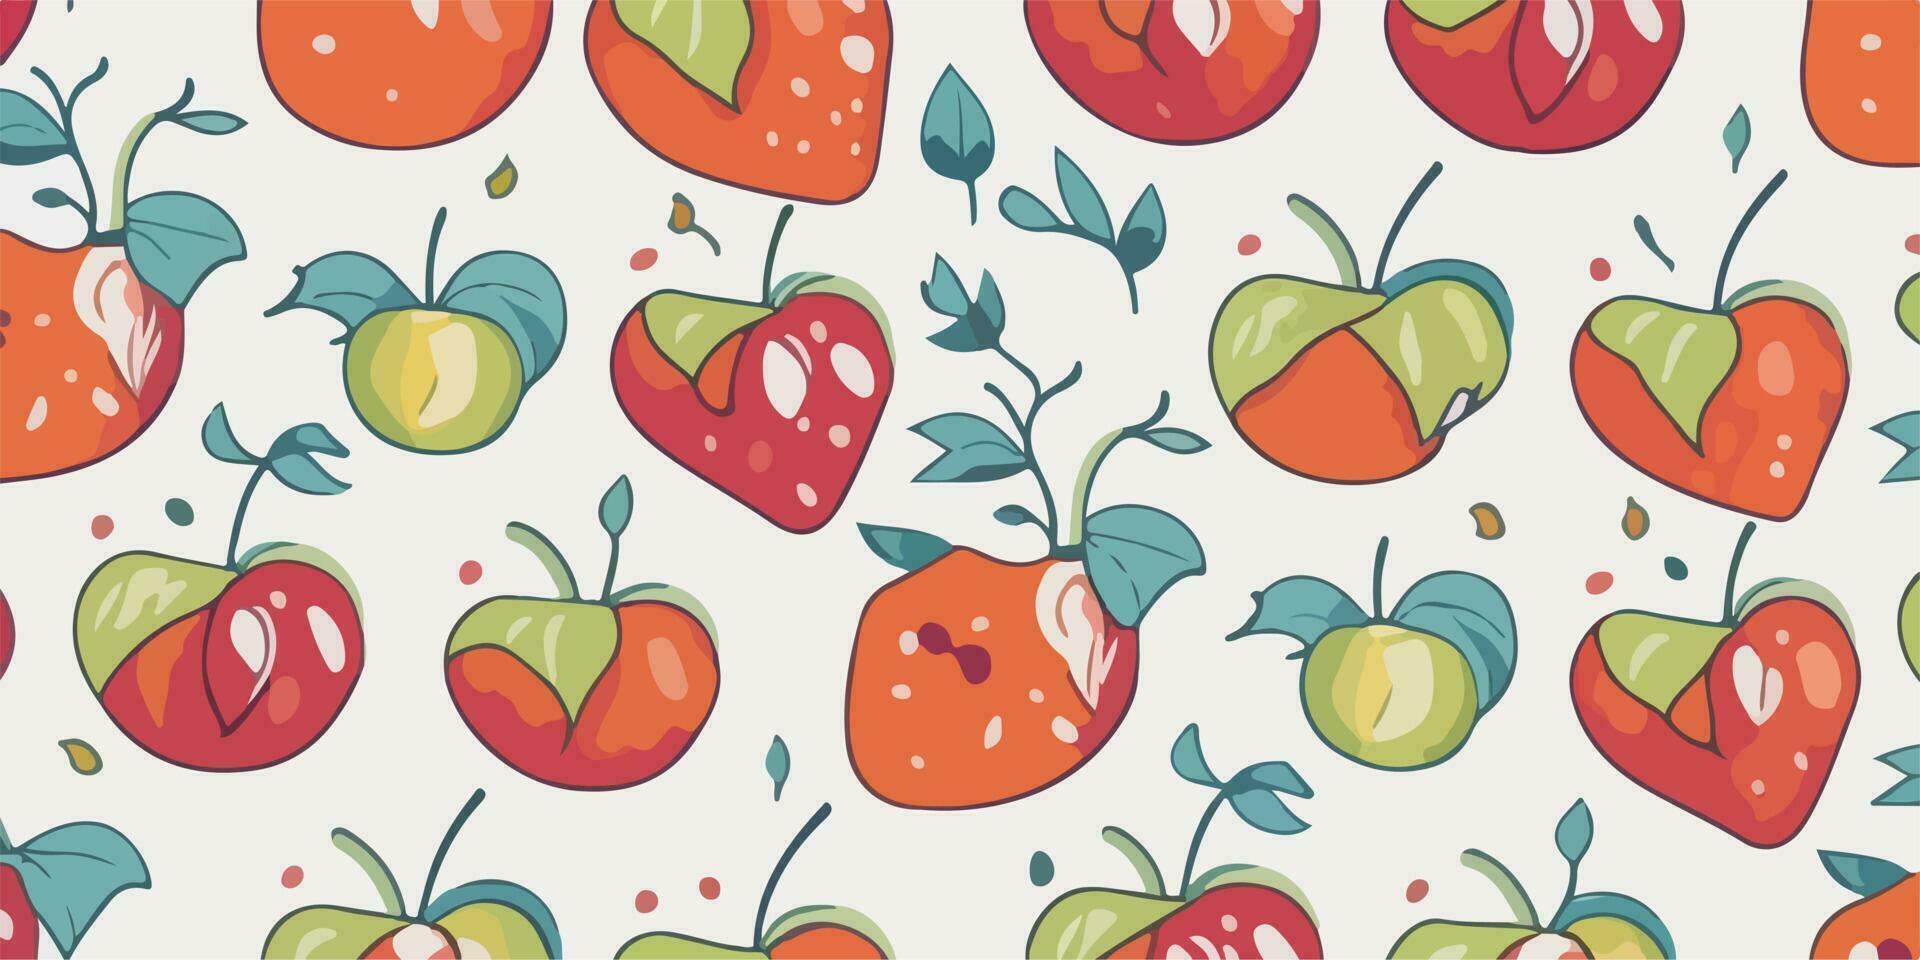 Geometric Elegance, Apple Patterns with Chic Geometric Background Designs vector